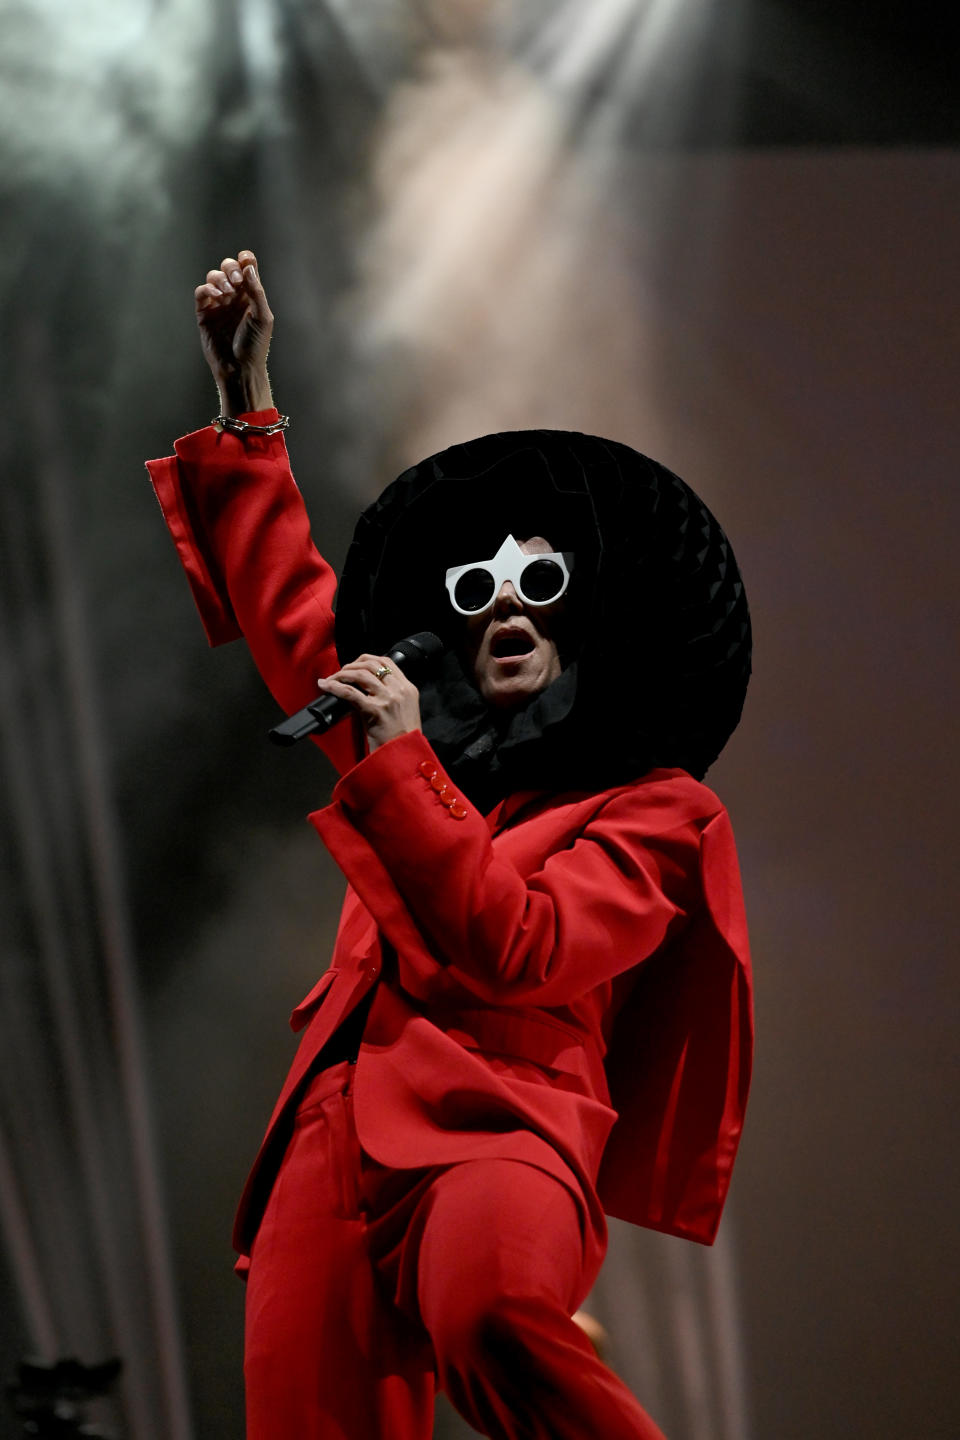 GLASTONBURY, ENGLAND - JUNE 25: Roisin Murphy performs on the West Holts Stage during day four of Glastonbury Festival at Worthy Farm, Pilton on June 25, 2022 in Glastonbury, England. (Photo by Kate Green/Getty Images)